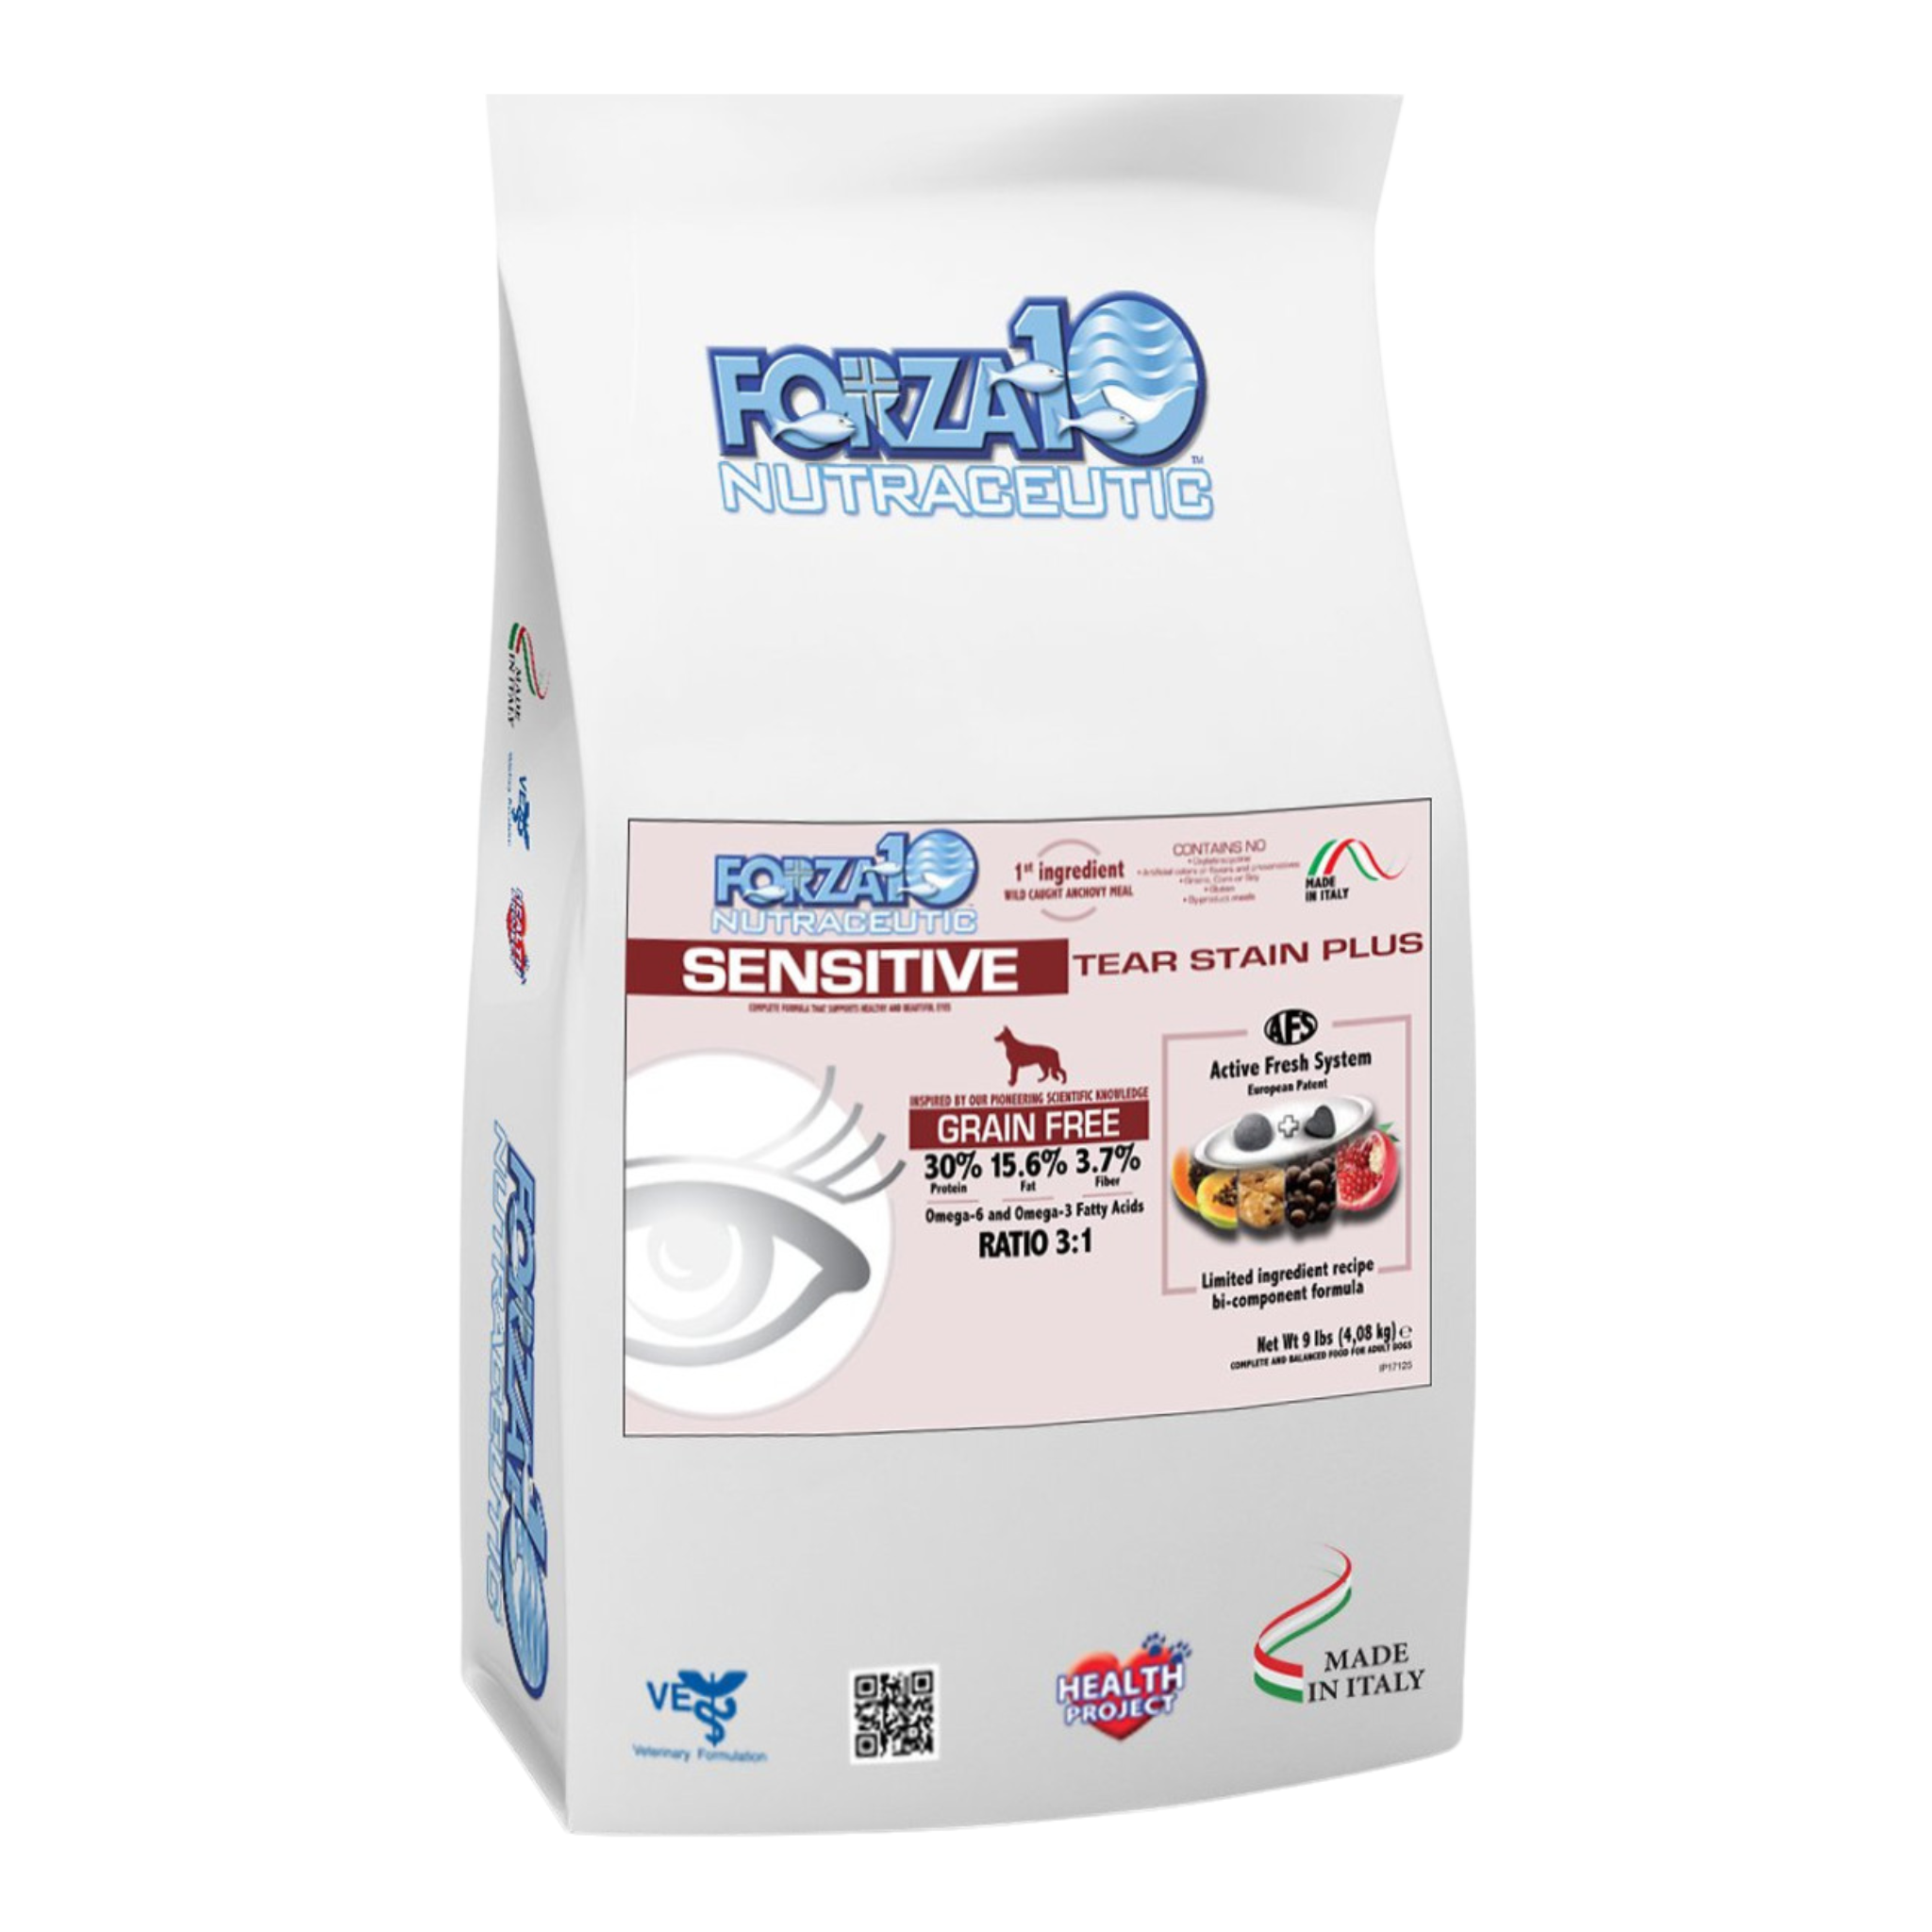 Forza10 Nutraceutic Sensitive Tear Stain Plus Grain-Free Dry Dog Food - Mutts & Co.